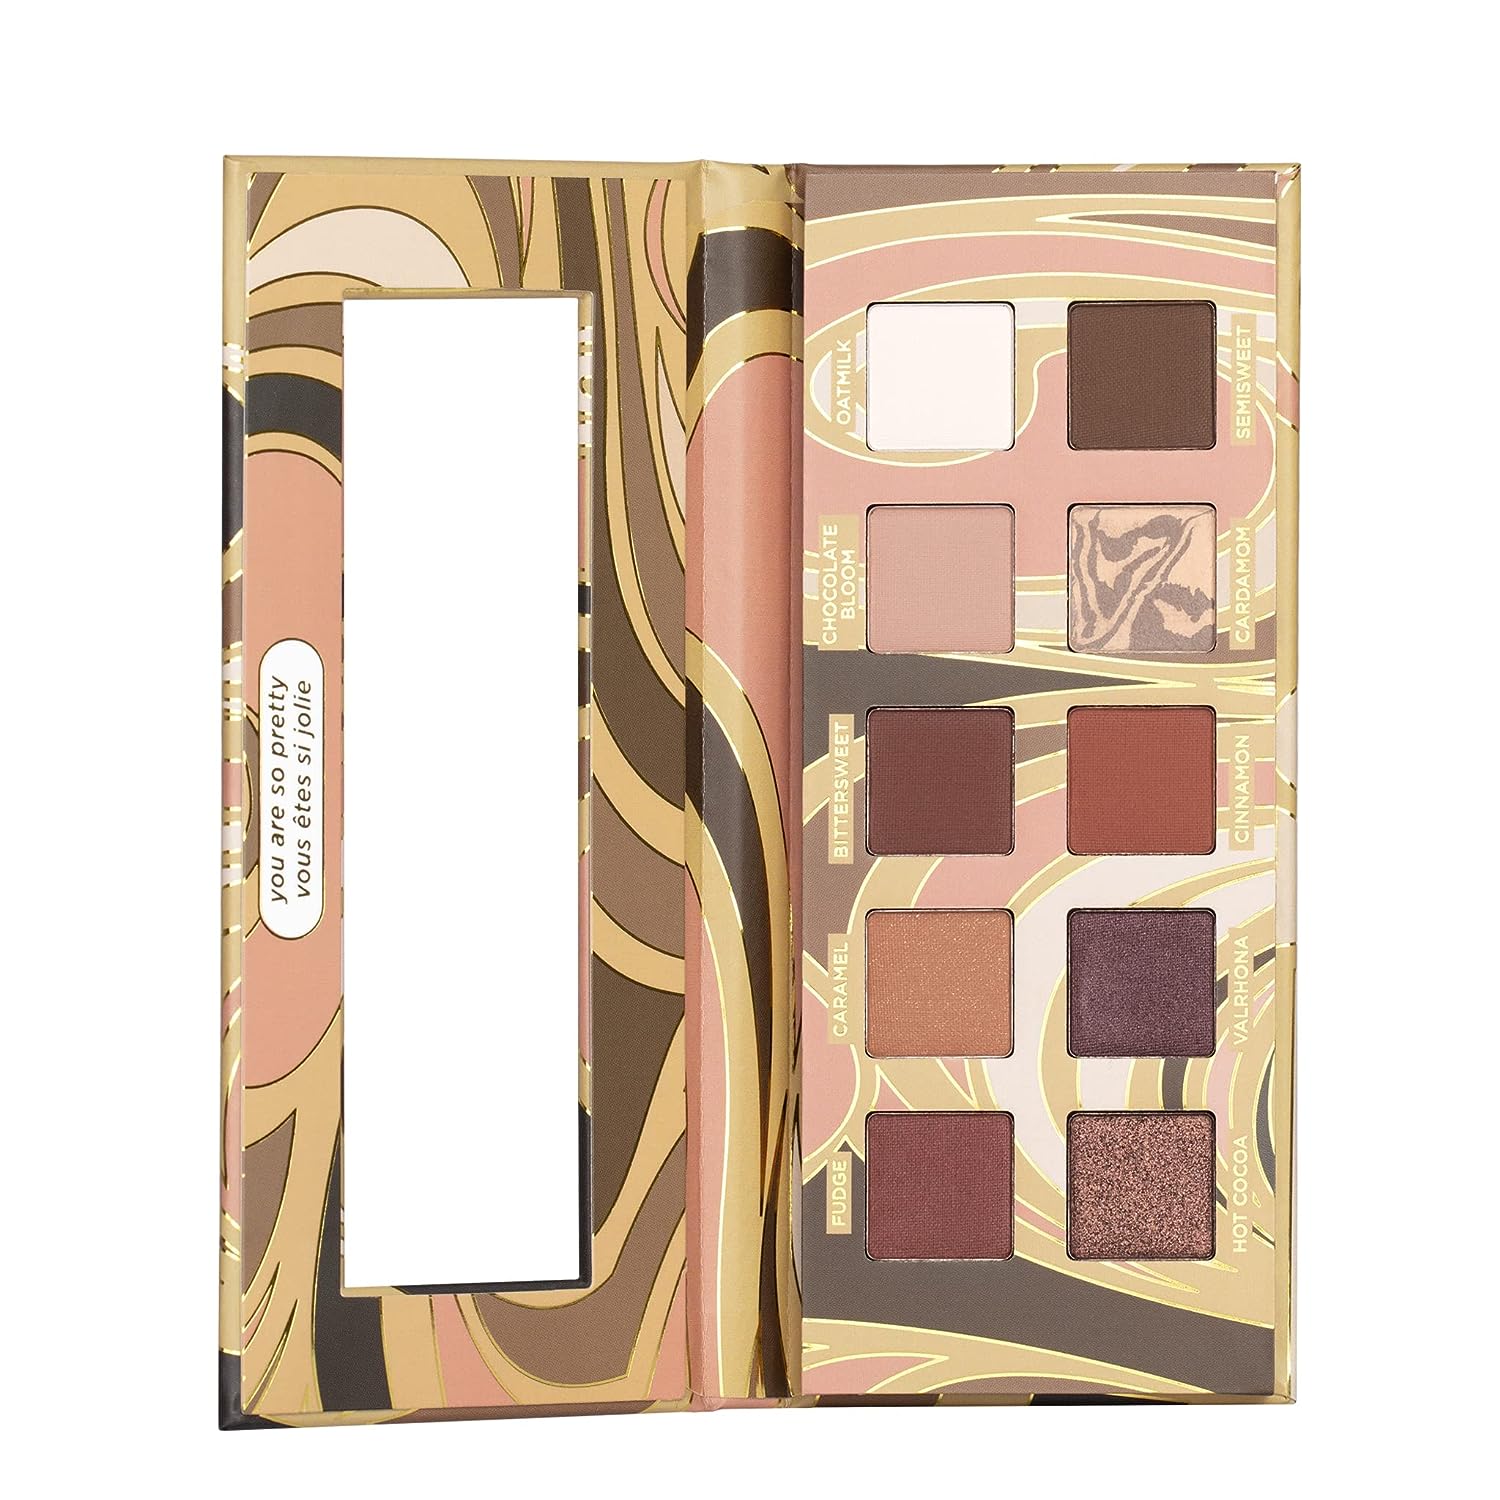 Pacifica Beauty, Cocoa Nudes Mineral Eyeshadow Palette, 10 Wearable Neutral Shades, Matte,Shimmer, Metallic, Eye Makeup, Longwearing and Blendable, Infused with Cocoa Butter, Vegan, Cruelty Free,Brown